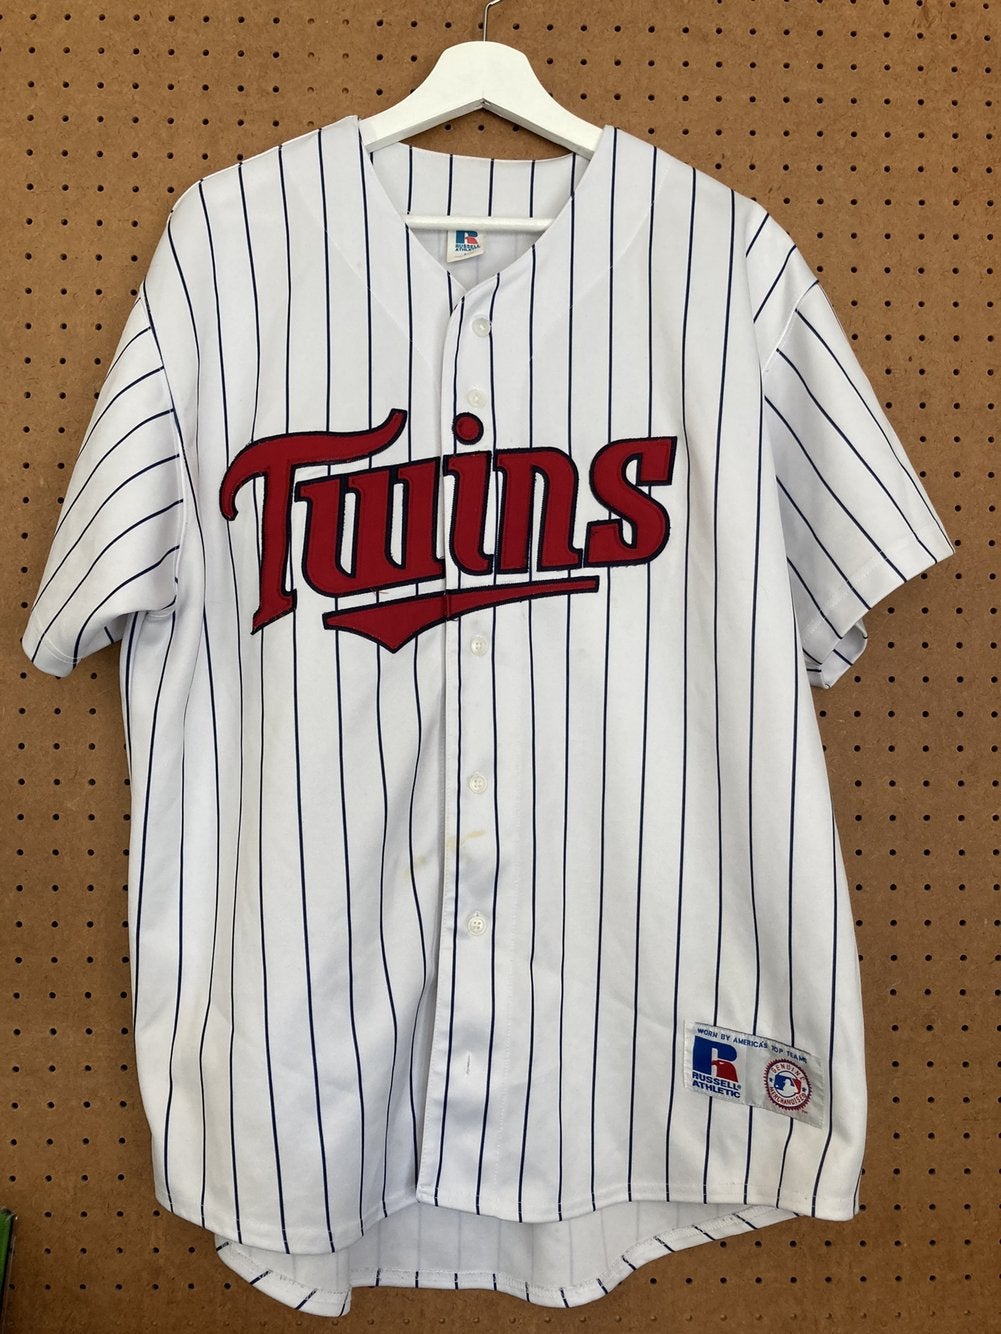 Twins, Brewers go Reverse Jersey for 1948 Throwbacks – SportsLogos